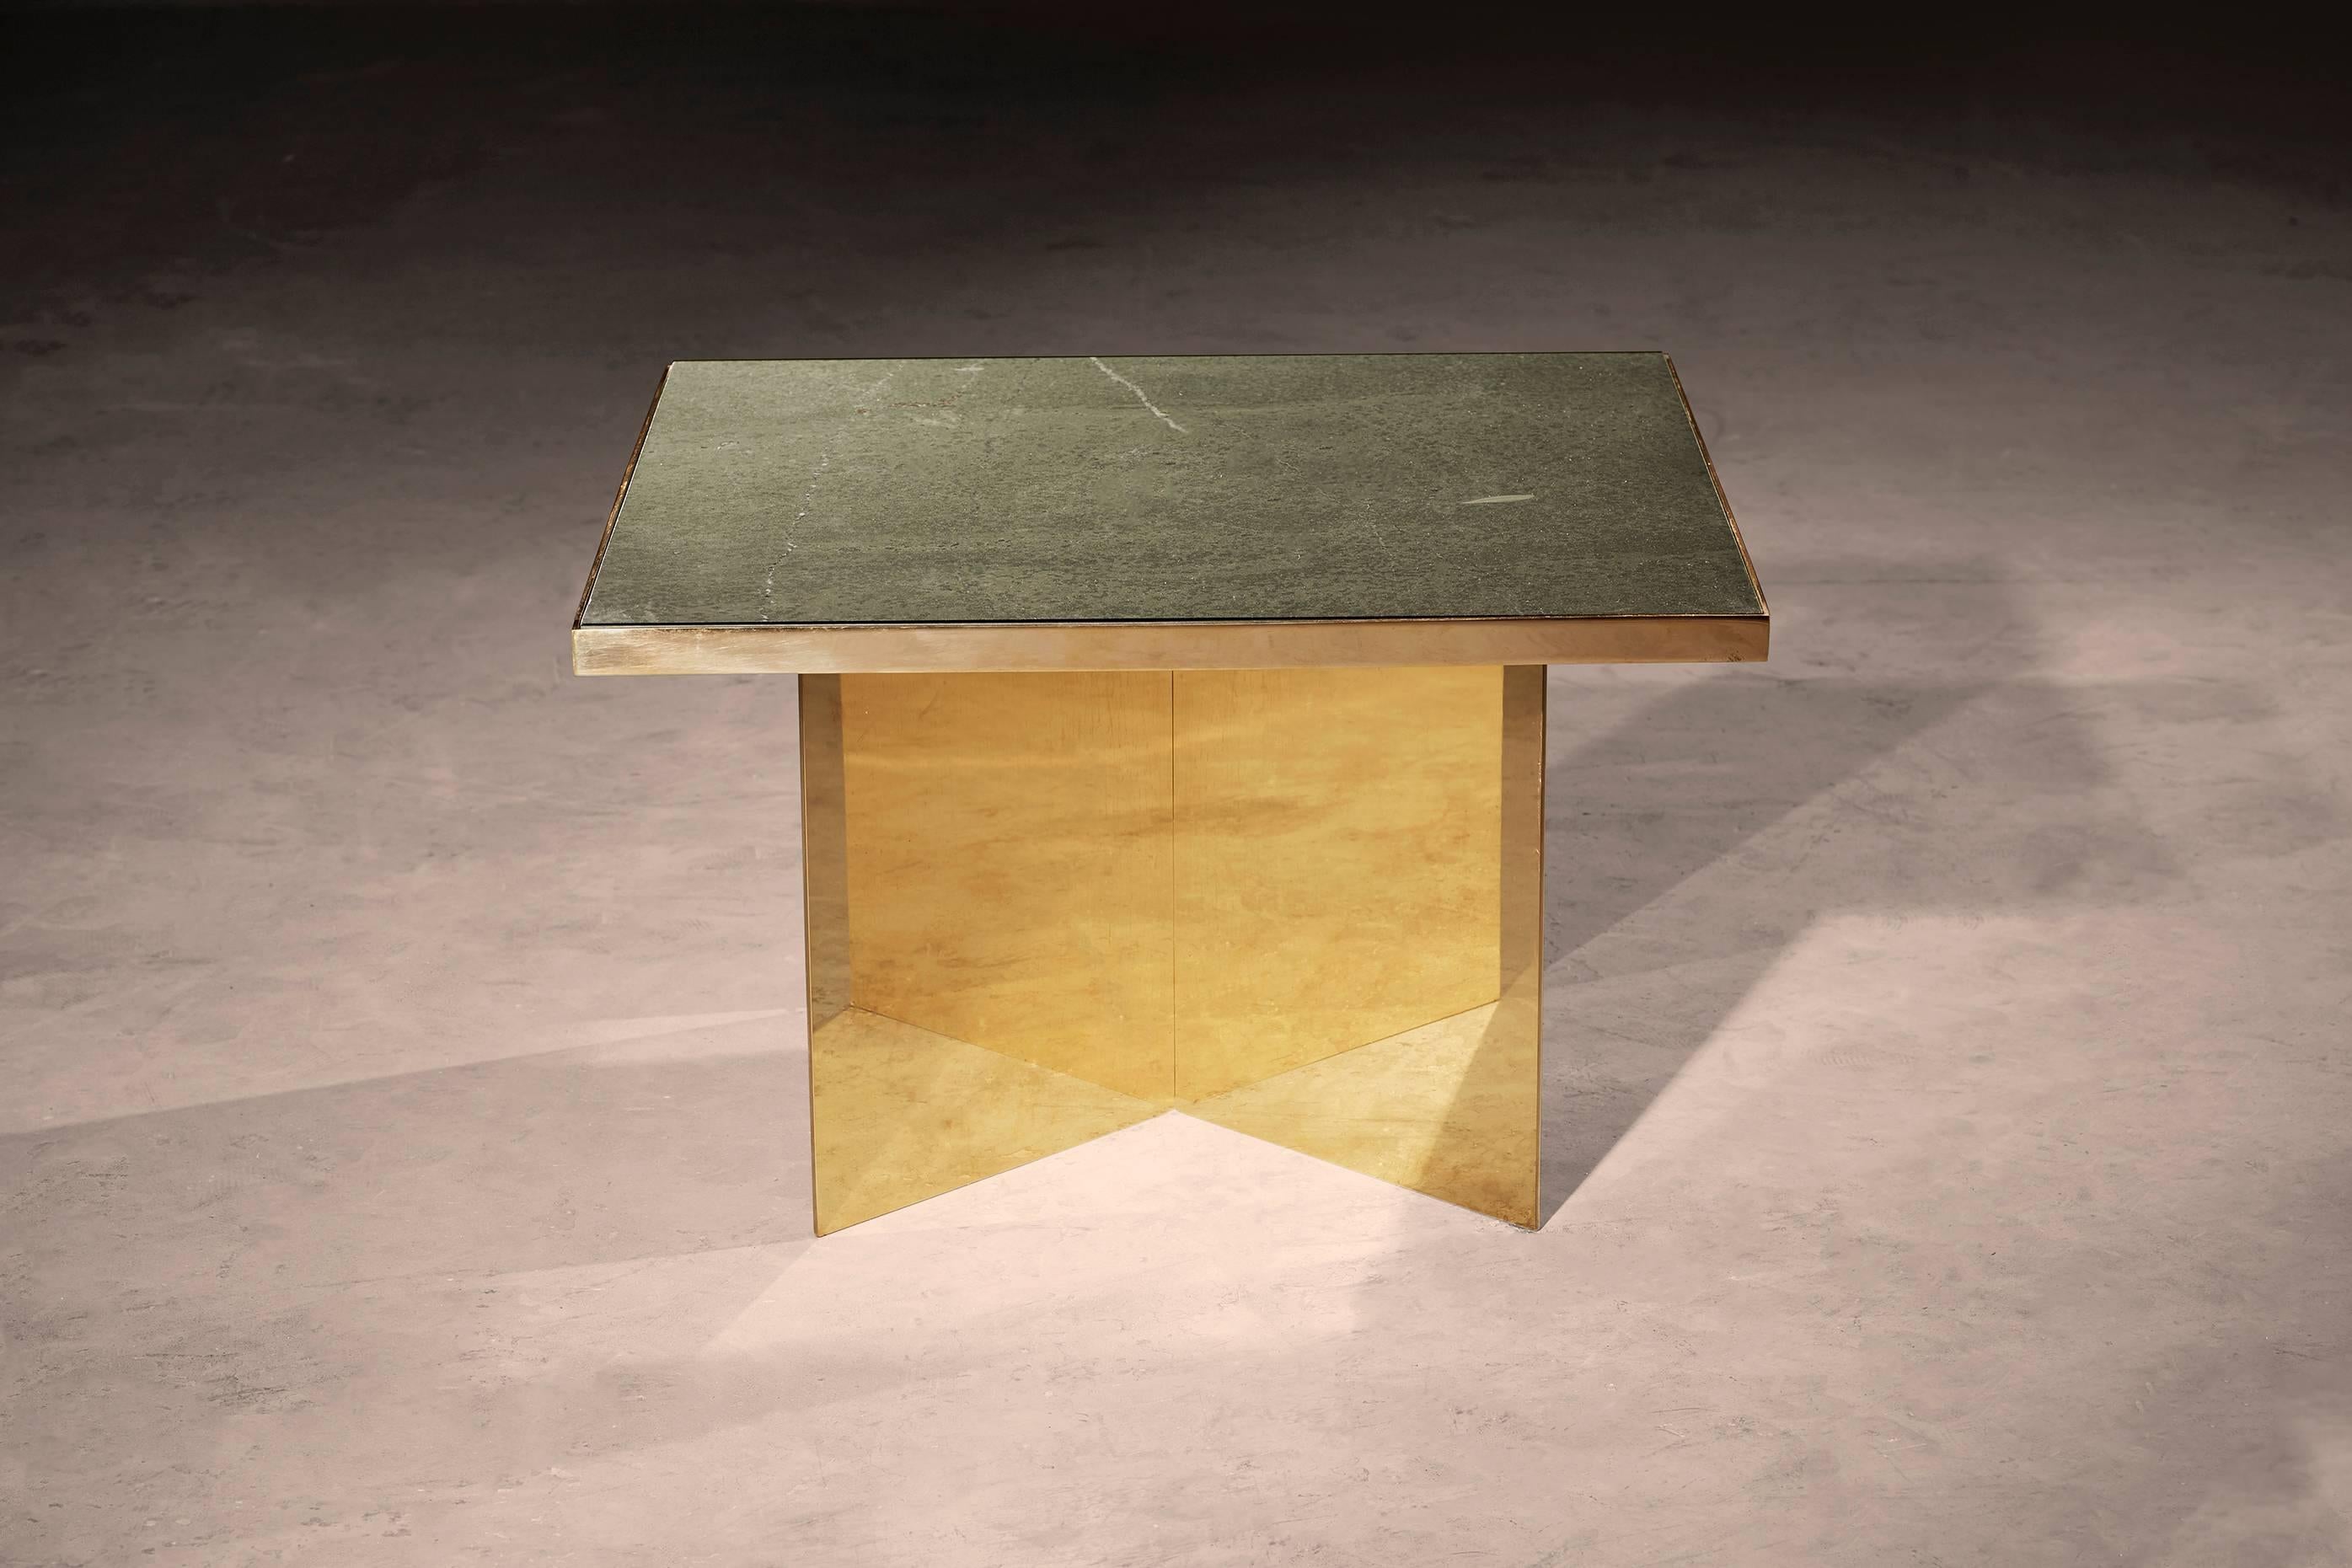 A coffee or side table in honed Cumbria slate and patinated brass. Hand crafted to order in the North. Bespoke finishes and sizes are available.

Measures: 80cm dia x 32cm height.
Custom finishes and sizes available upon request.

Made to order